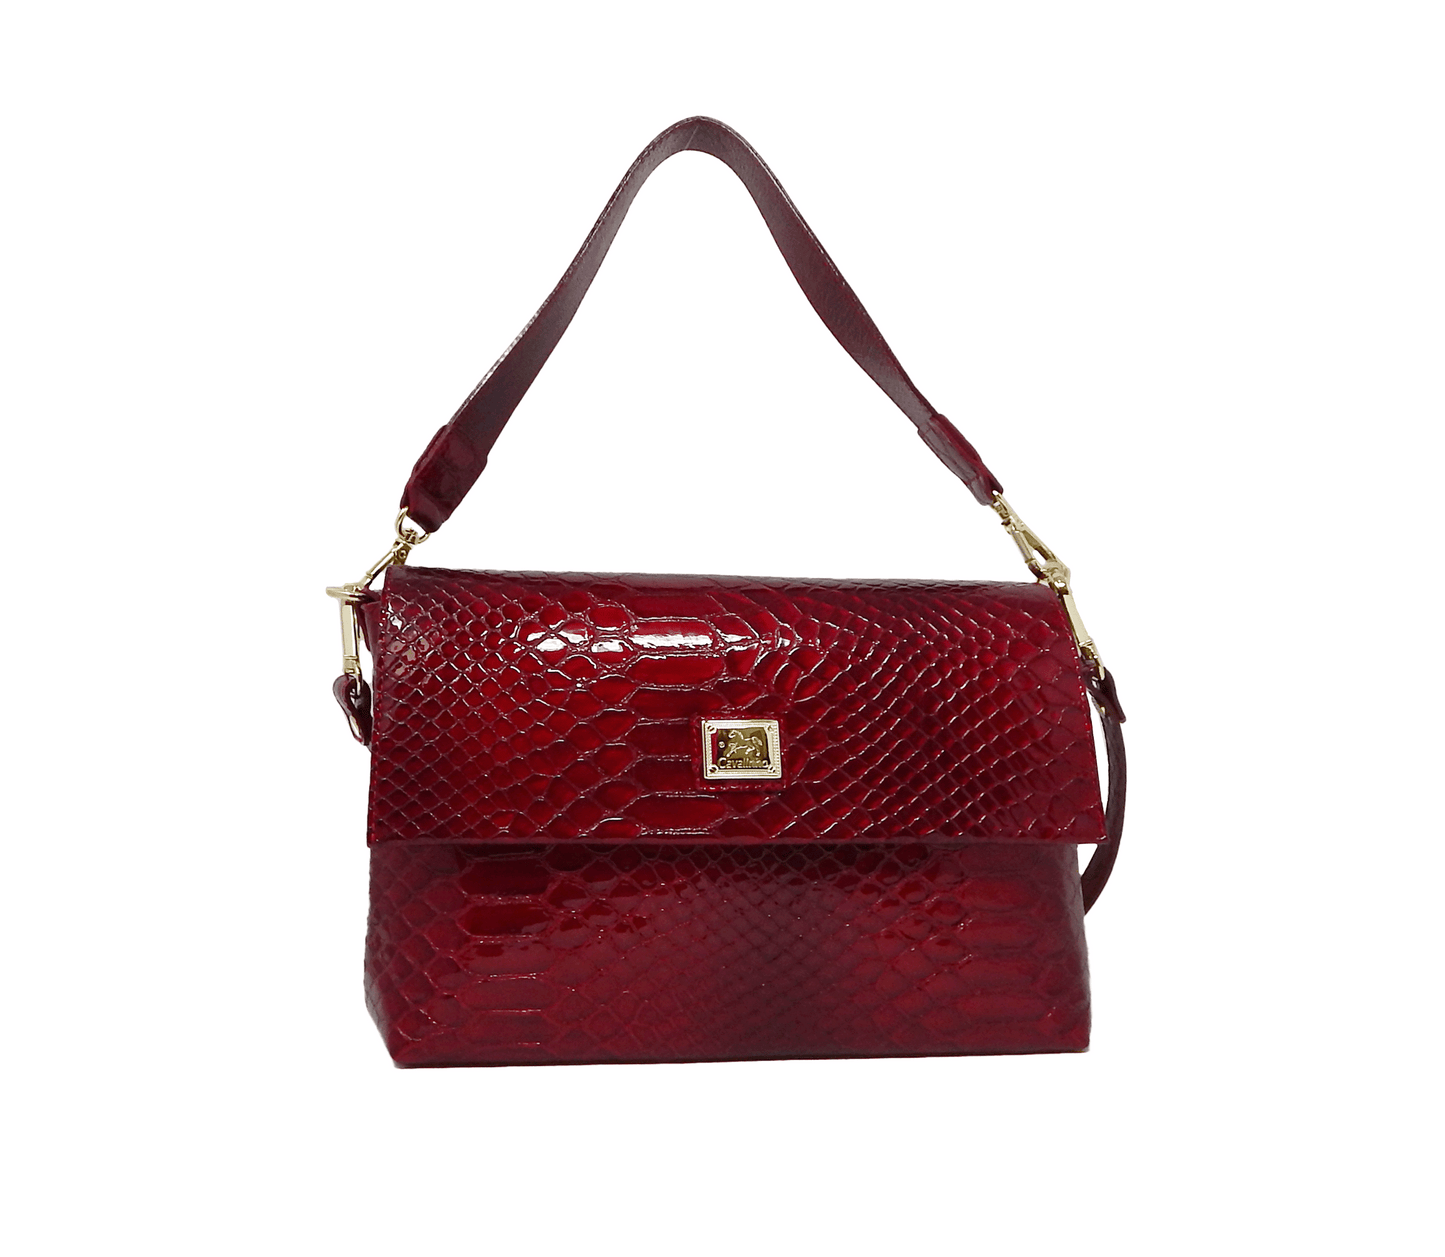 #color_ Red | Cavalinho Gallop 3 in 1: Patent Leather Clutch, Handbag or Crossbody Bag - Red - 18170509.04_1